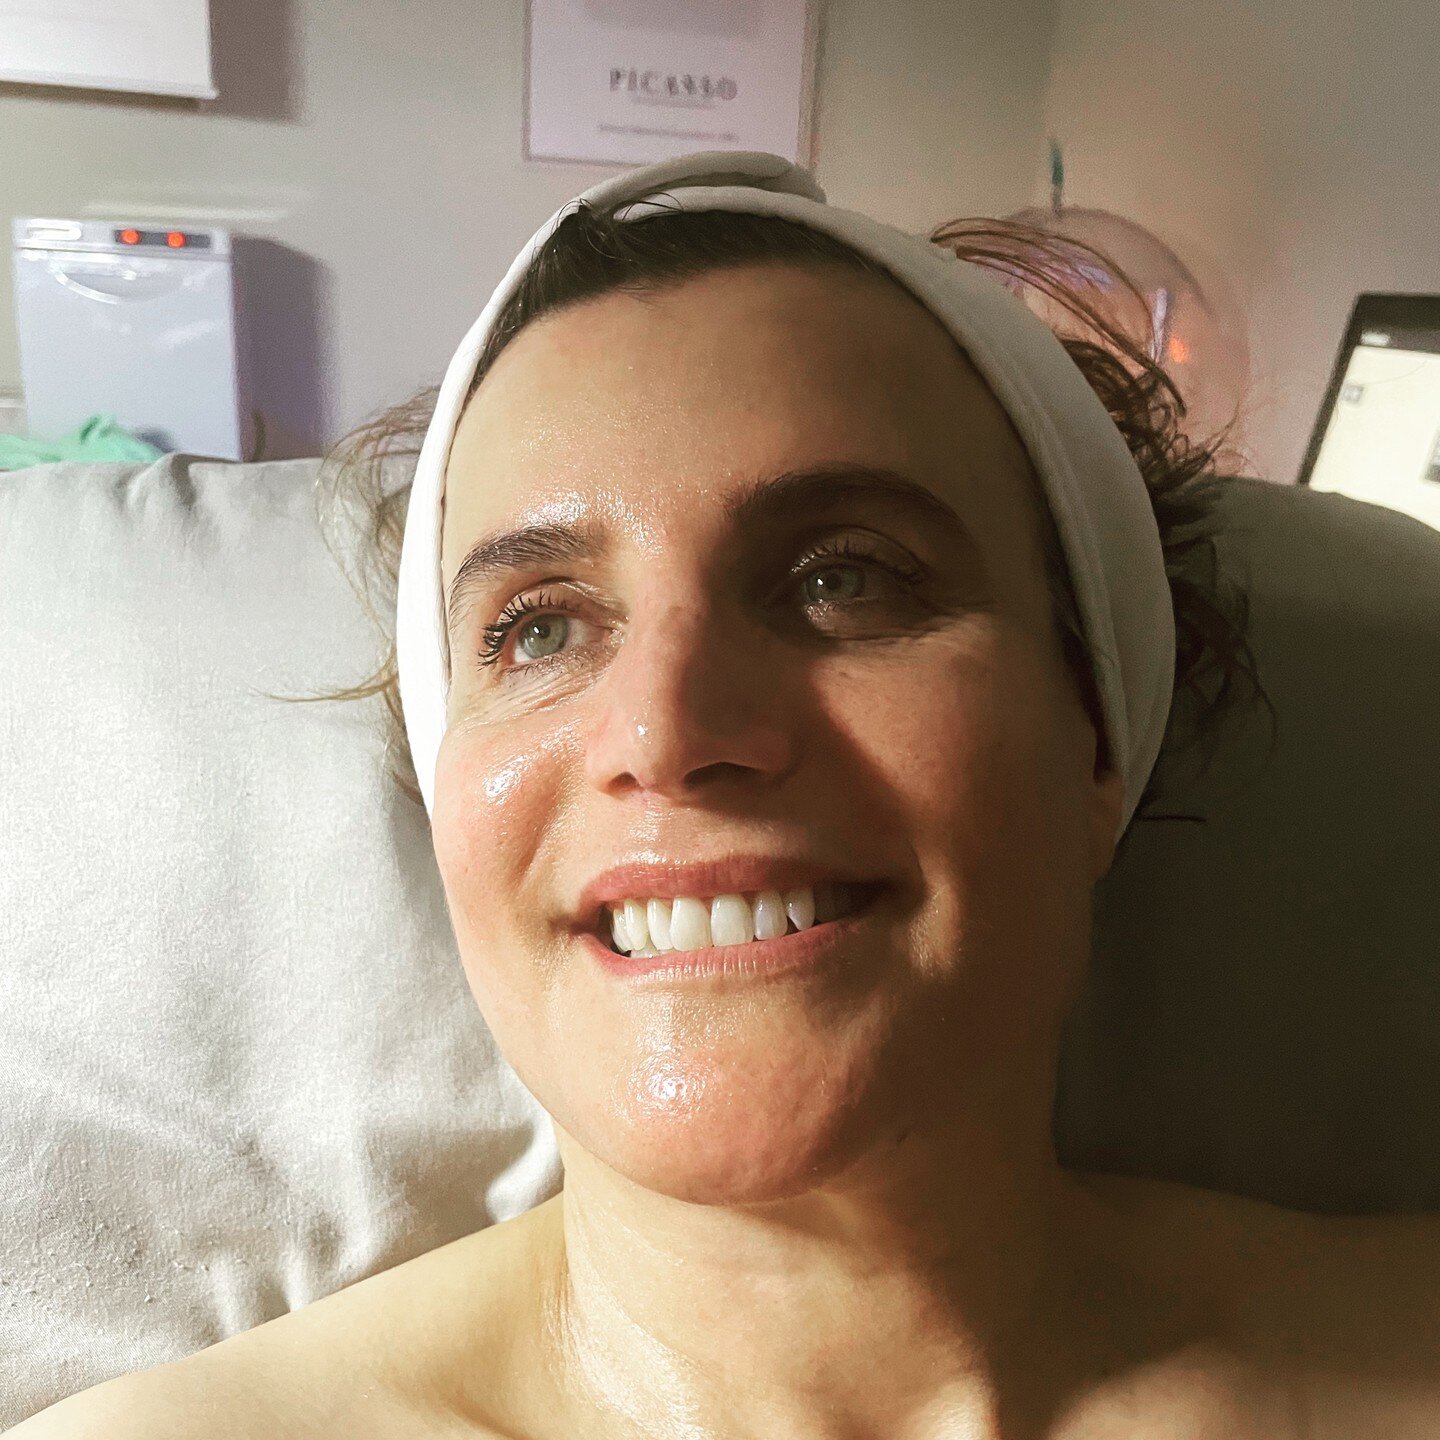 This 57-year young beauty is radiant and lifted after a weekly series of microcurrent and regular Hydrafacials! No Botox or fillers! A woman's dream!
#Oakland,#Oaklandfacials, #hydrafacial,#microcurrent,#oaklandbeauty,#Eastbayskincare,#Valentinesfaci